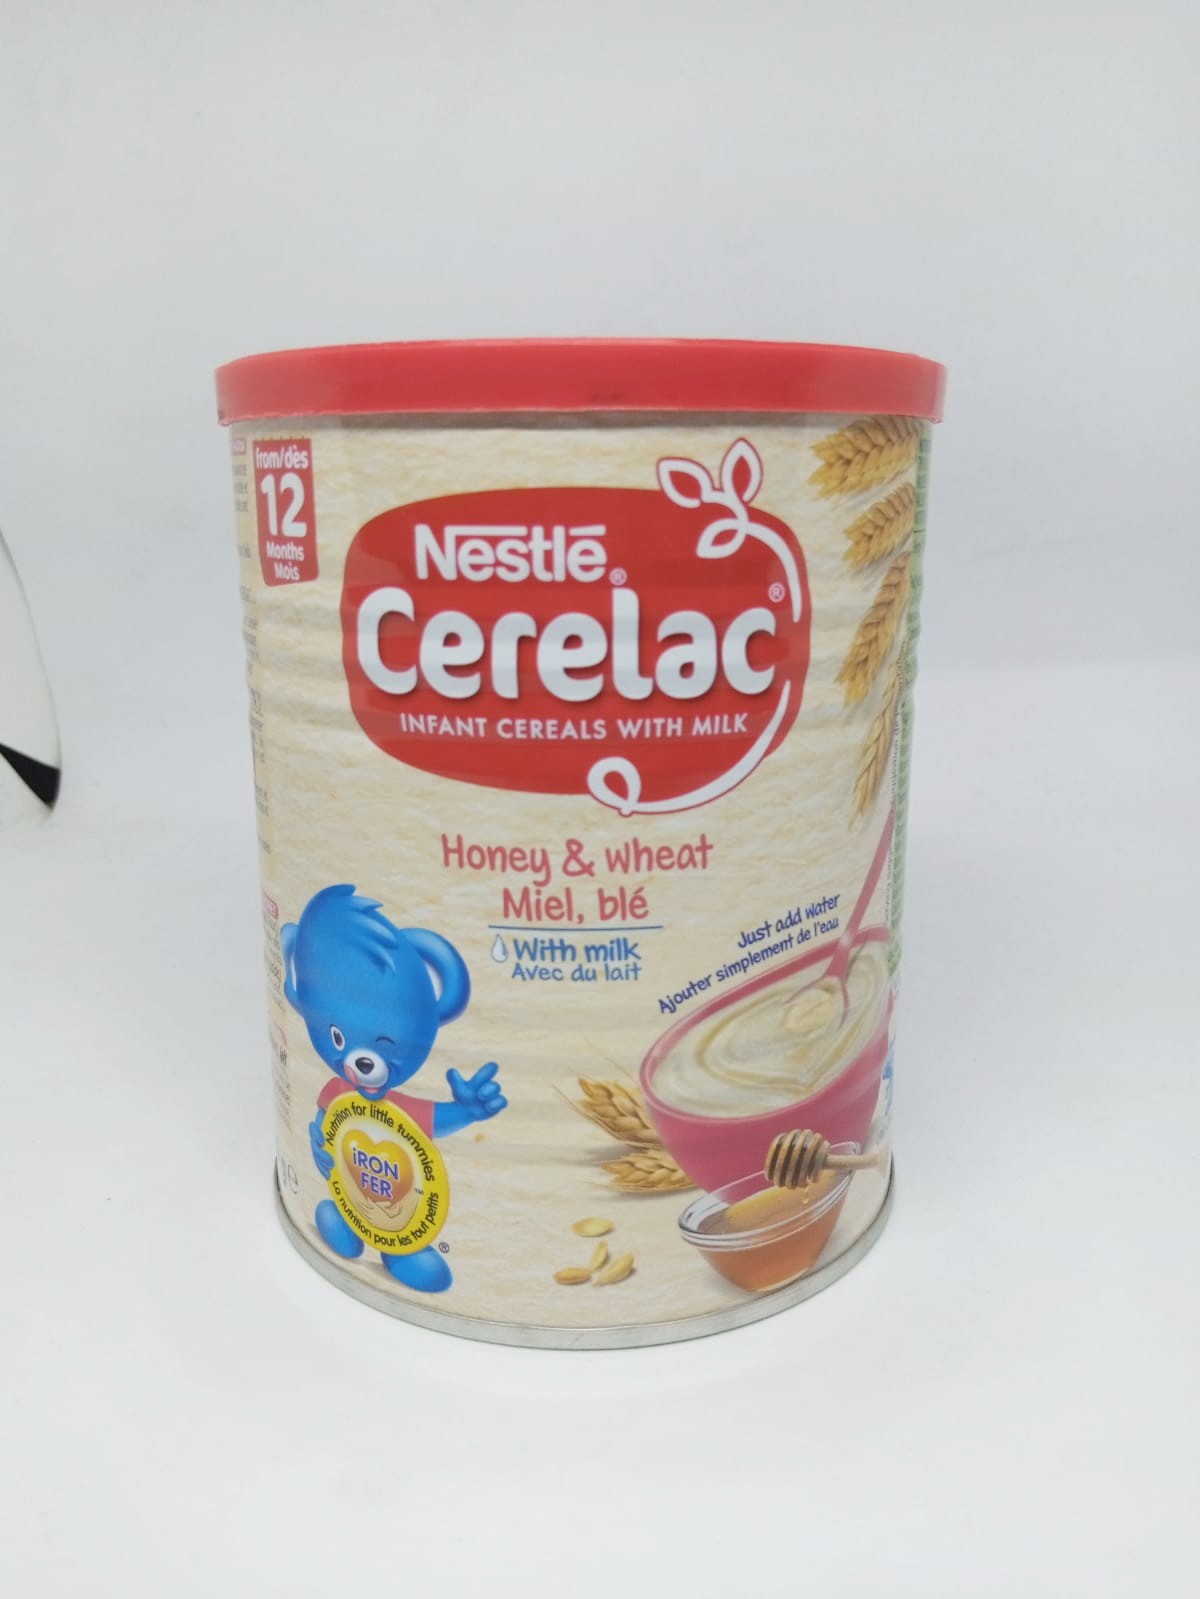 NESTLE CERELAC (UK) 400g FROM 12 MONTHS HONEY & WHEAT